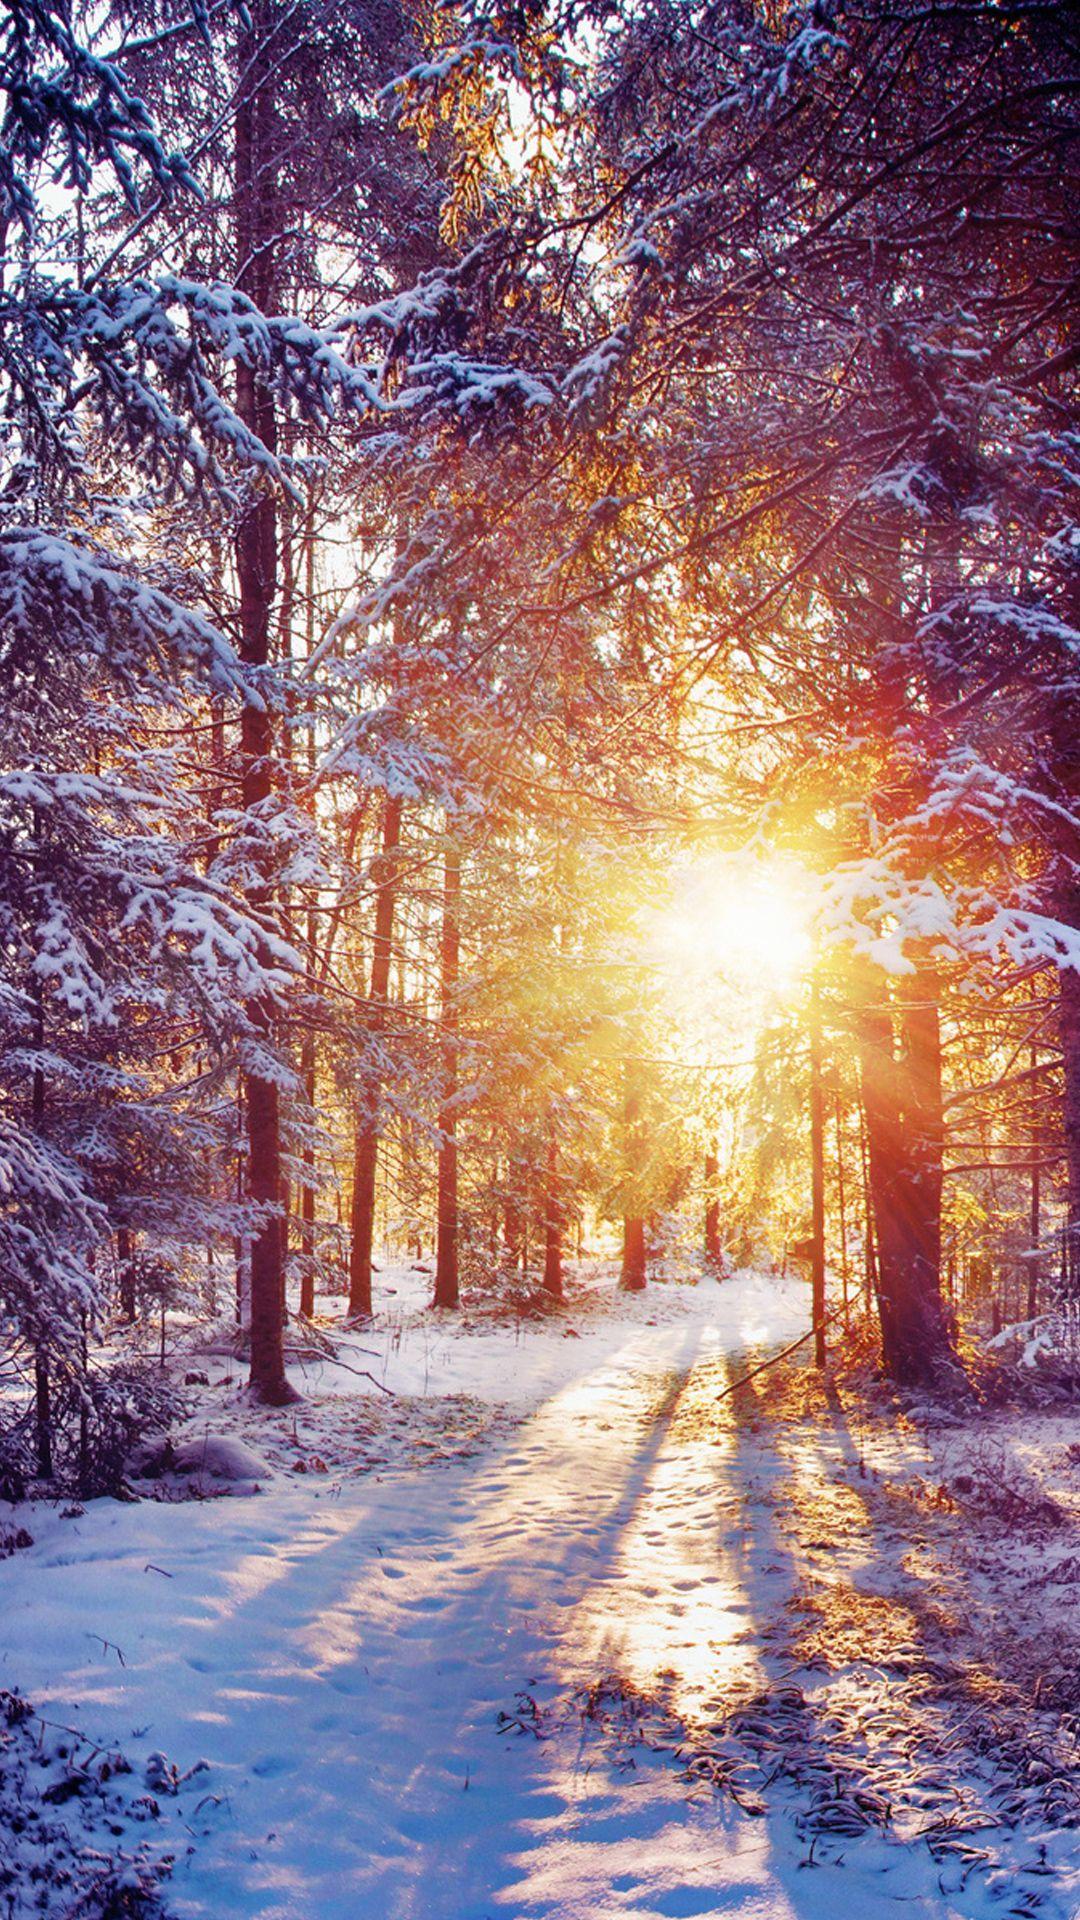 BEAUTIFUL NATURE WALLPAPER FREE TO DOWNLOAD. Colors of Winter